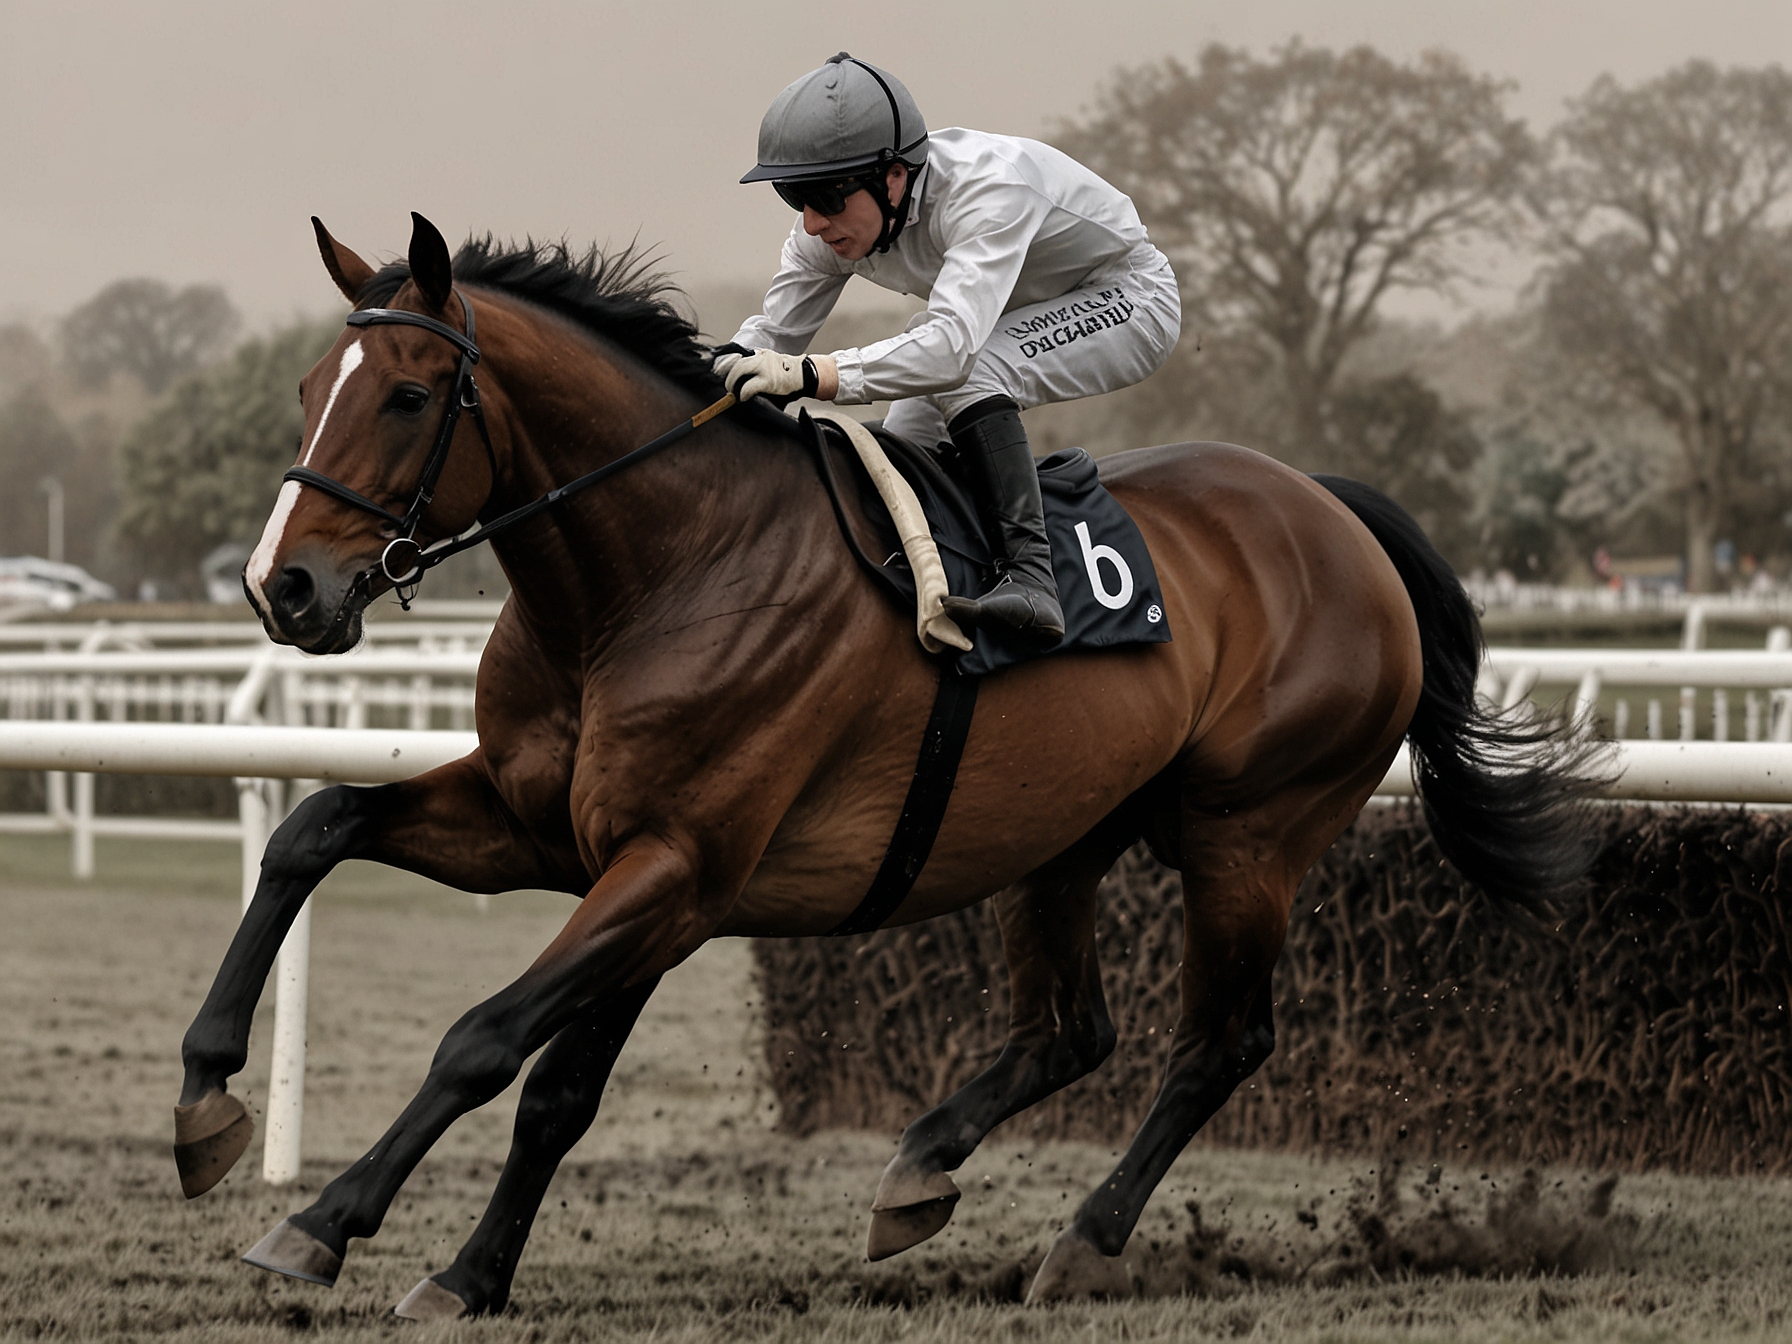 Image of jockey Jo Mason confidently riding Templegate's NAP during a race, showcasing her expert handling and the horse's robust form on soft ground.